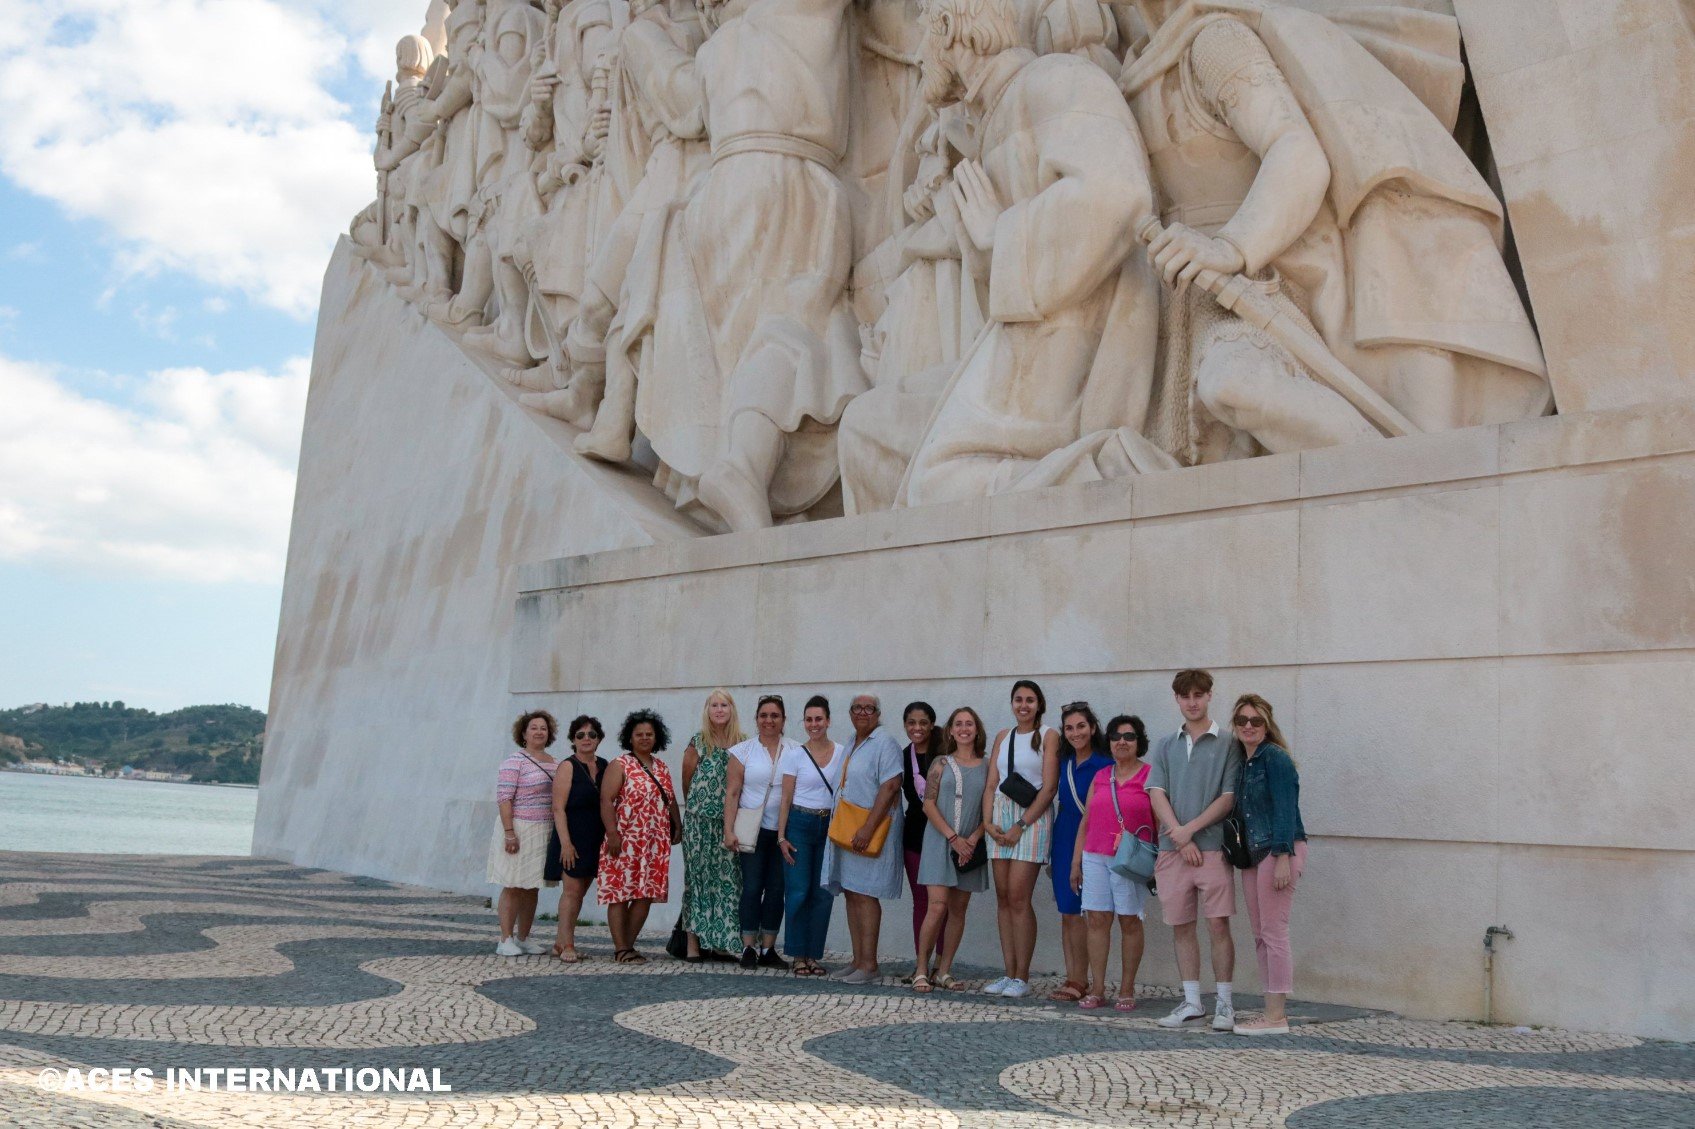 The entire Educators Field Study group poses for a photo in front of The Monument to The Discoveries, located in Portugal.